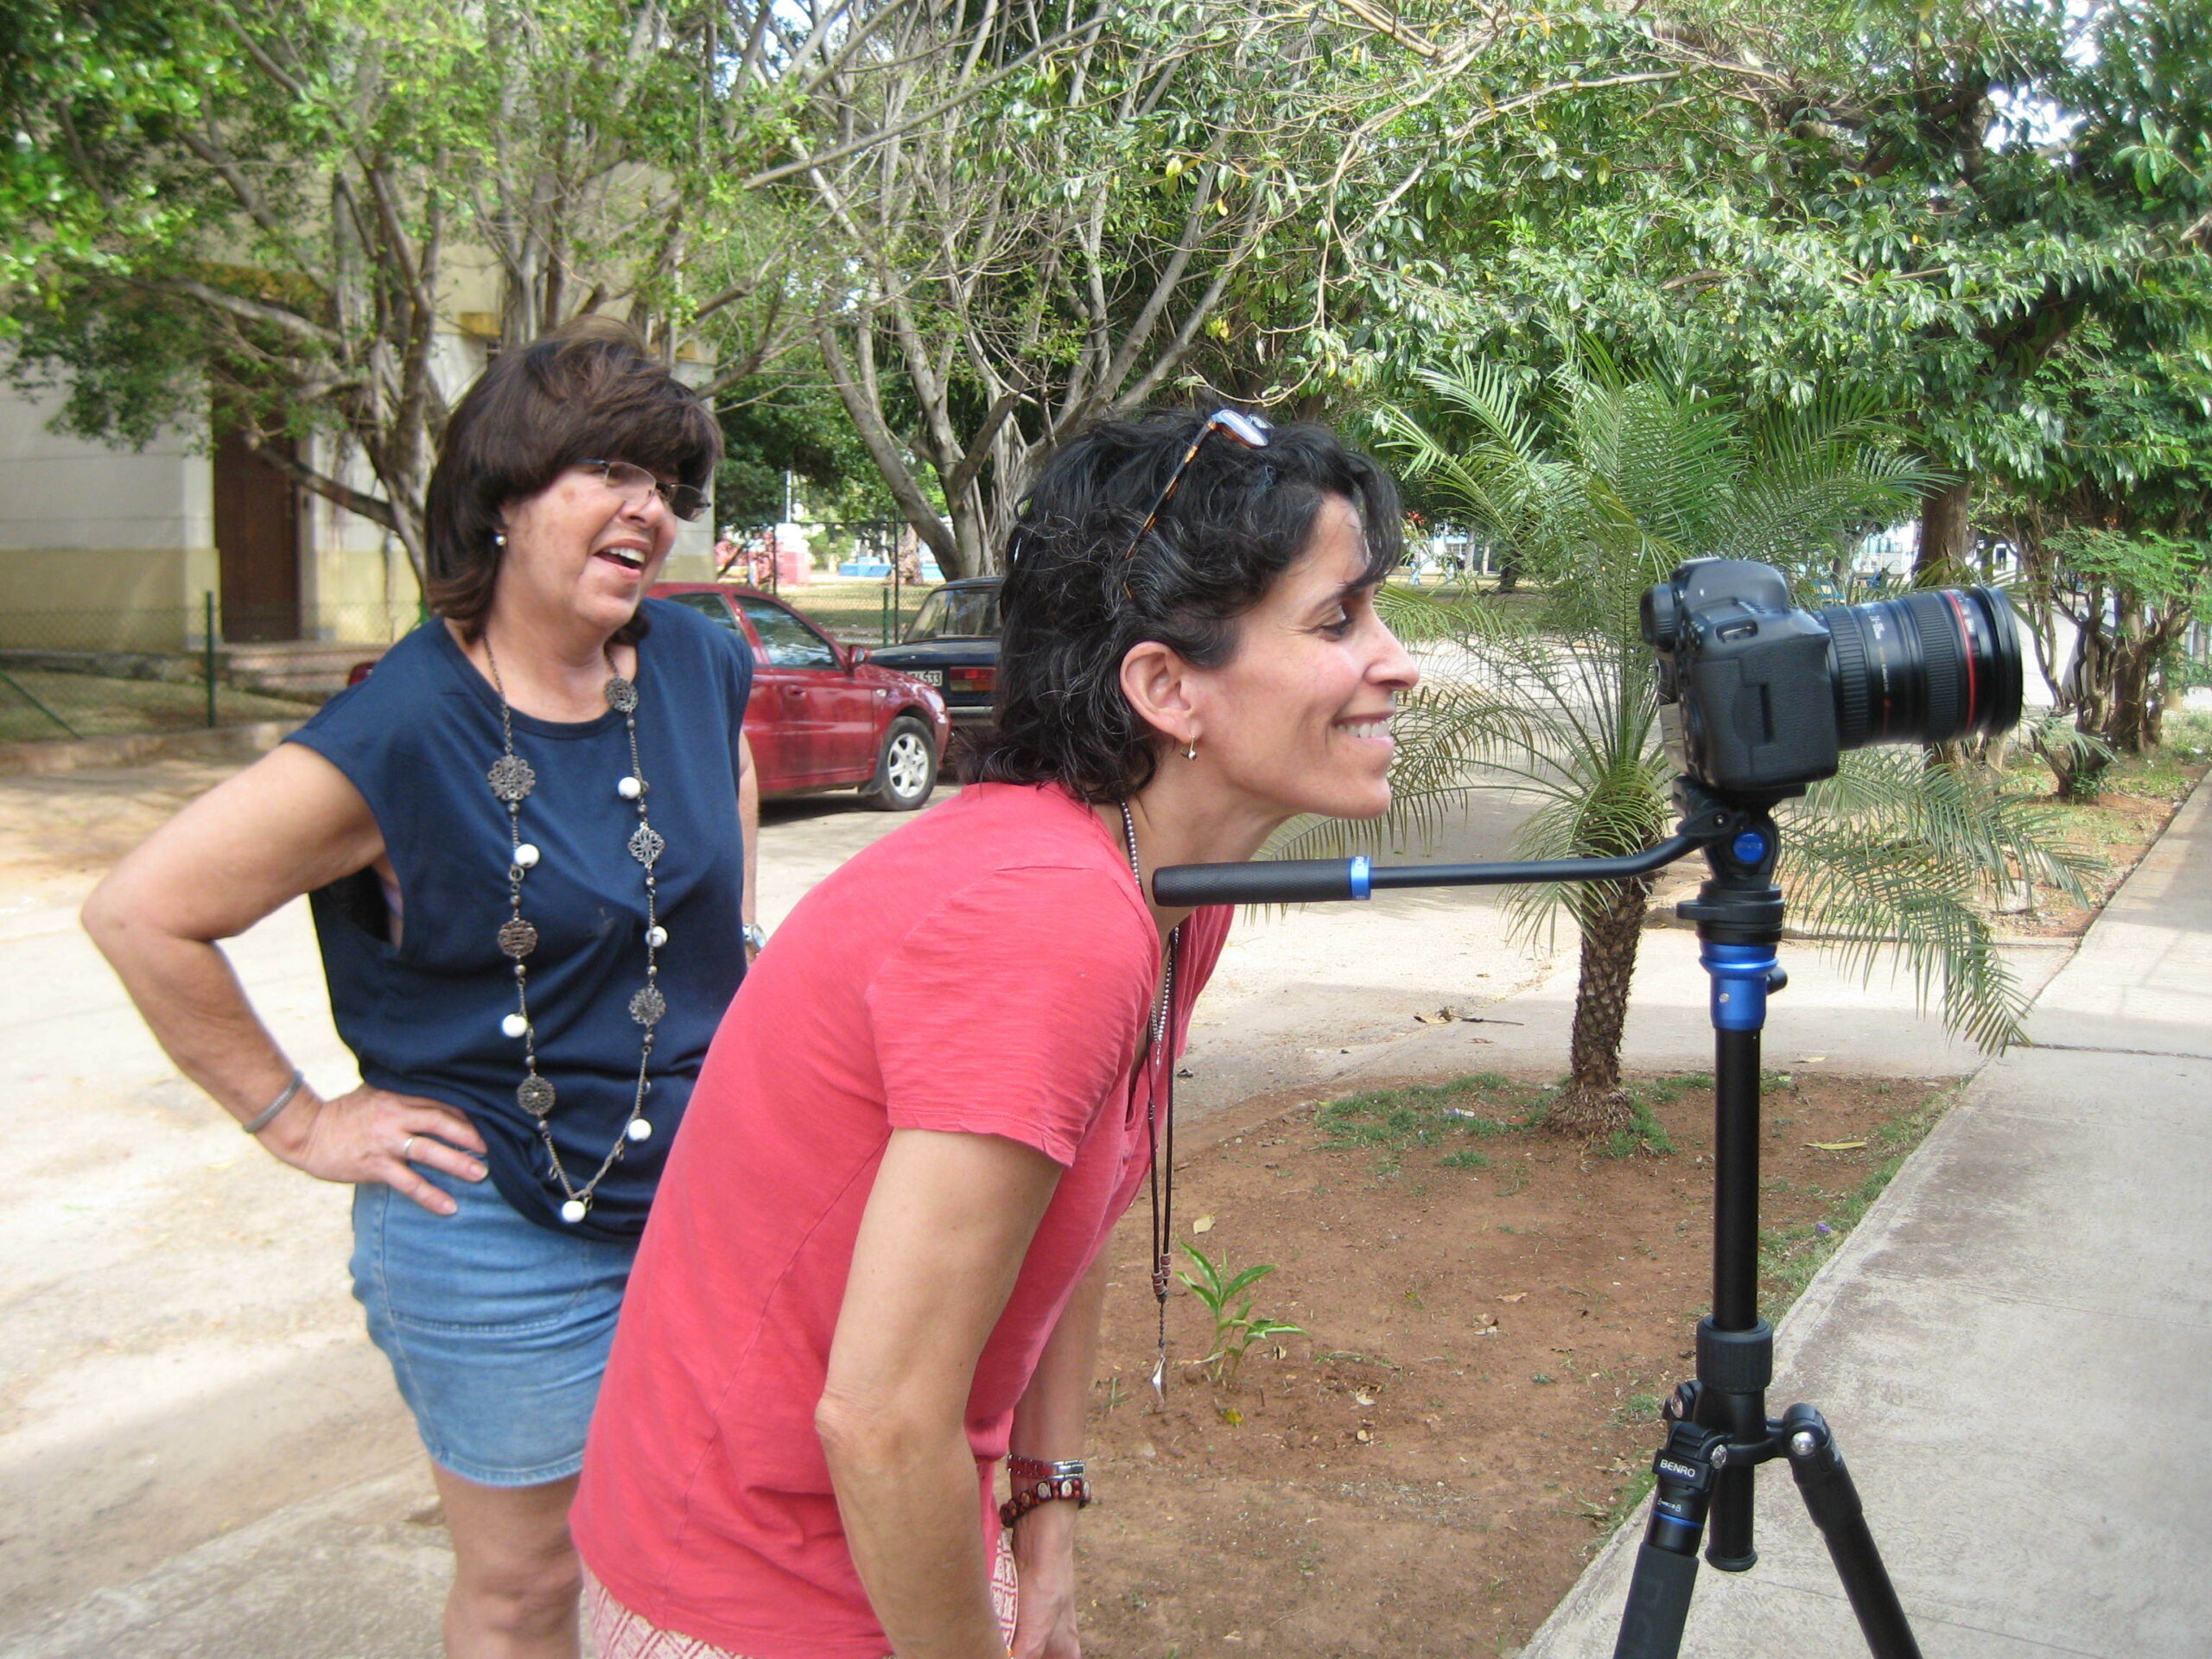 Christiane Arbesu on location in Cuba with her cousin Mimi. COURTESY THE ARTIST